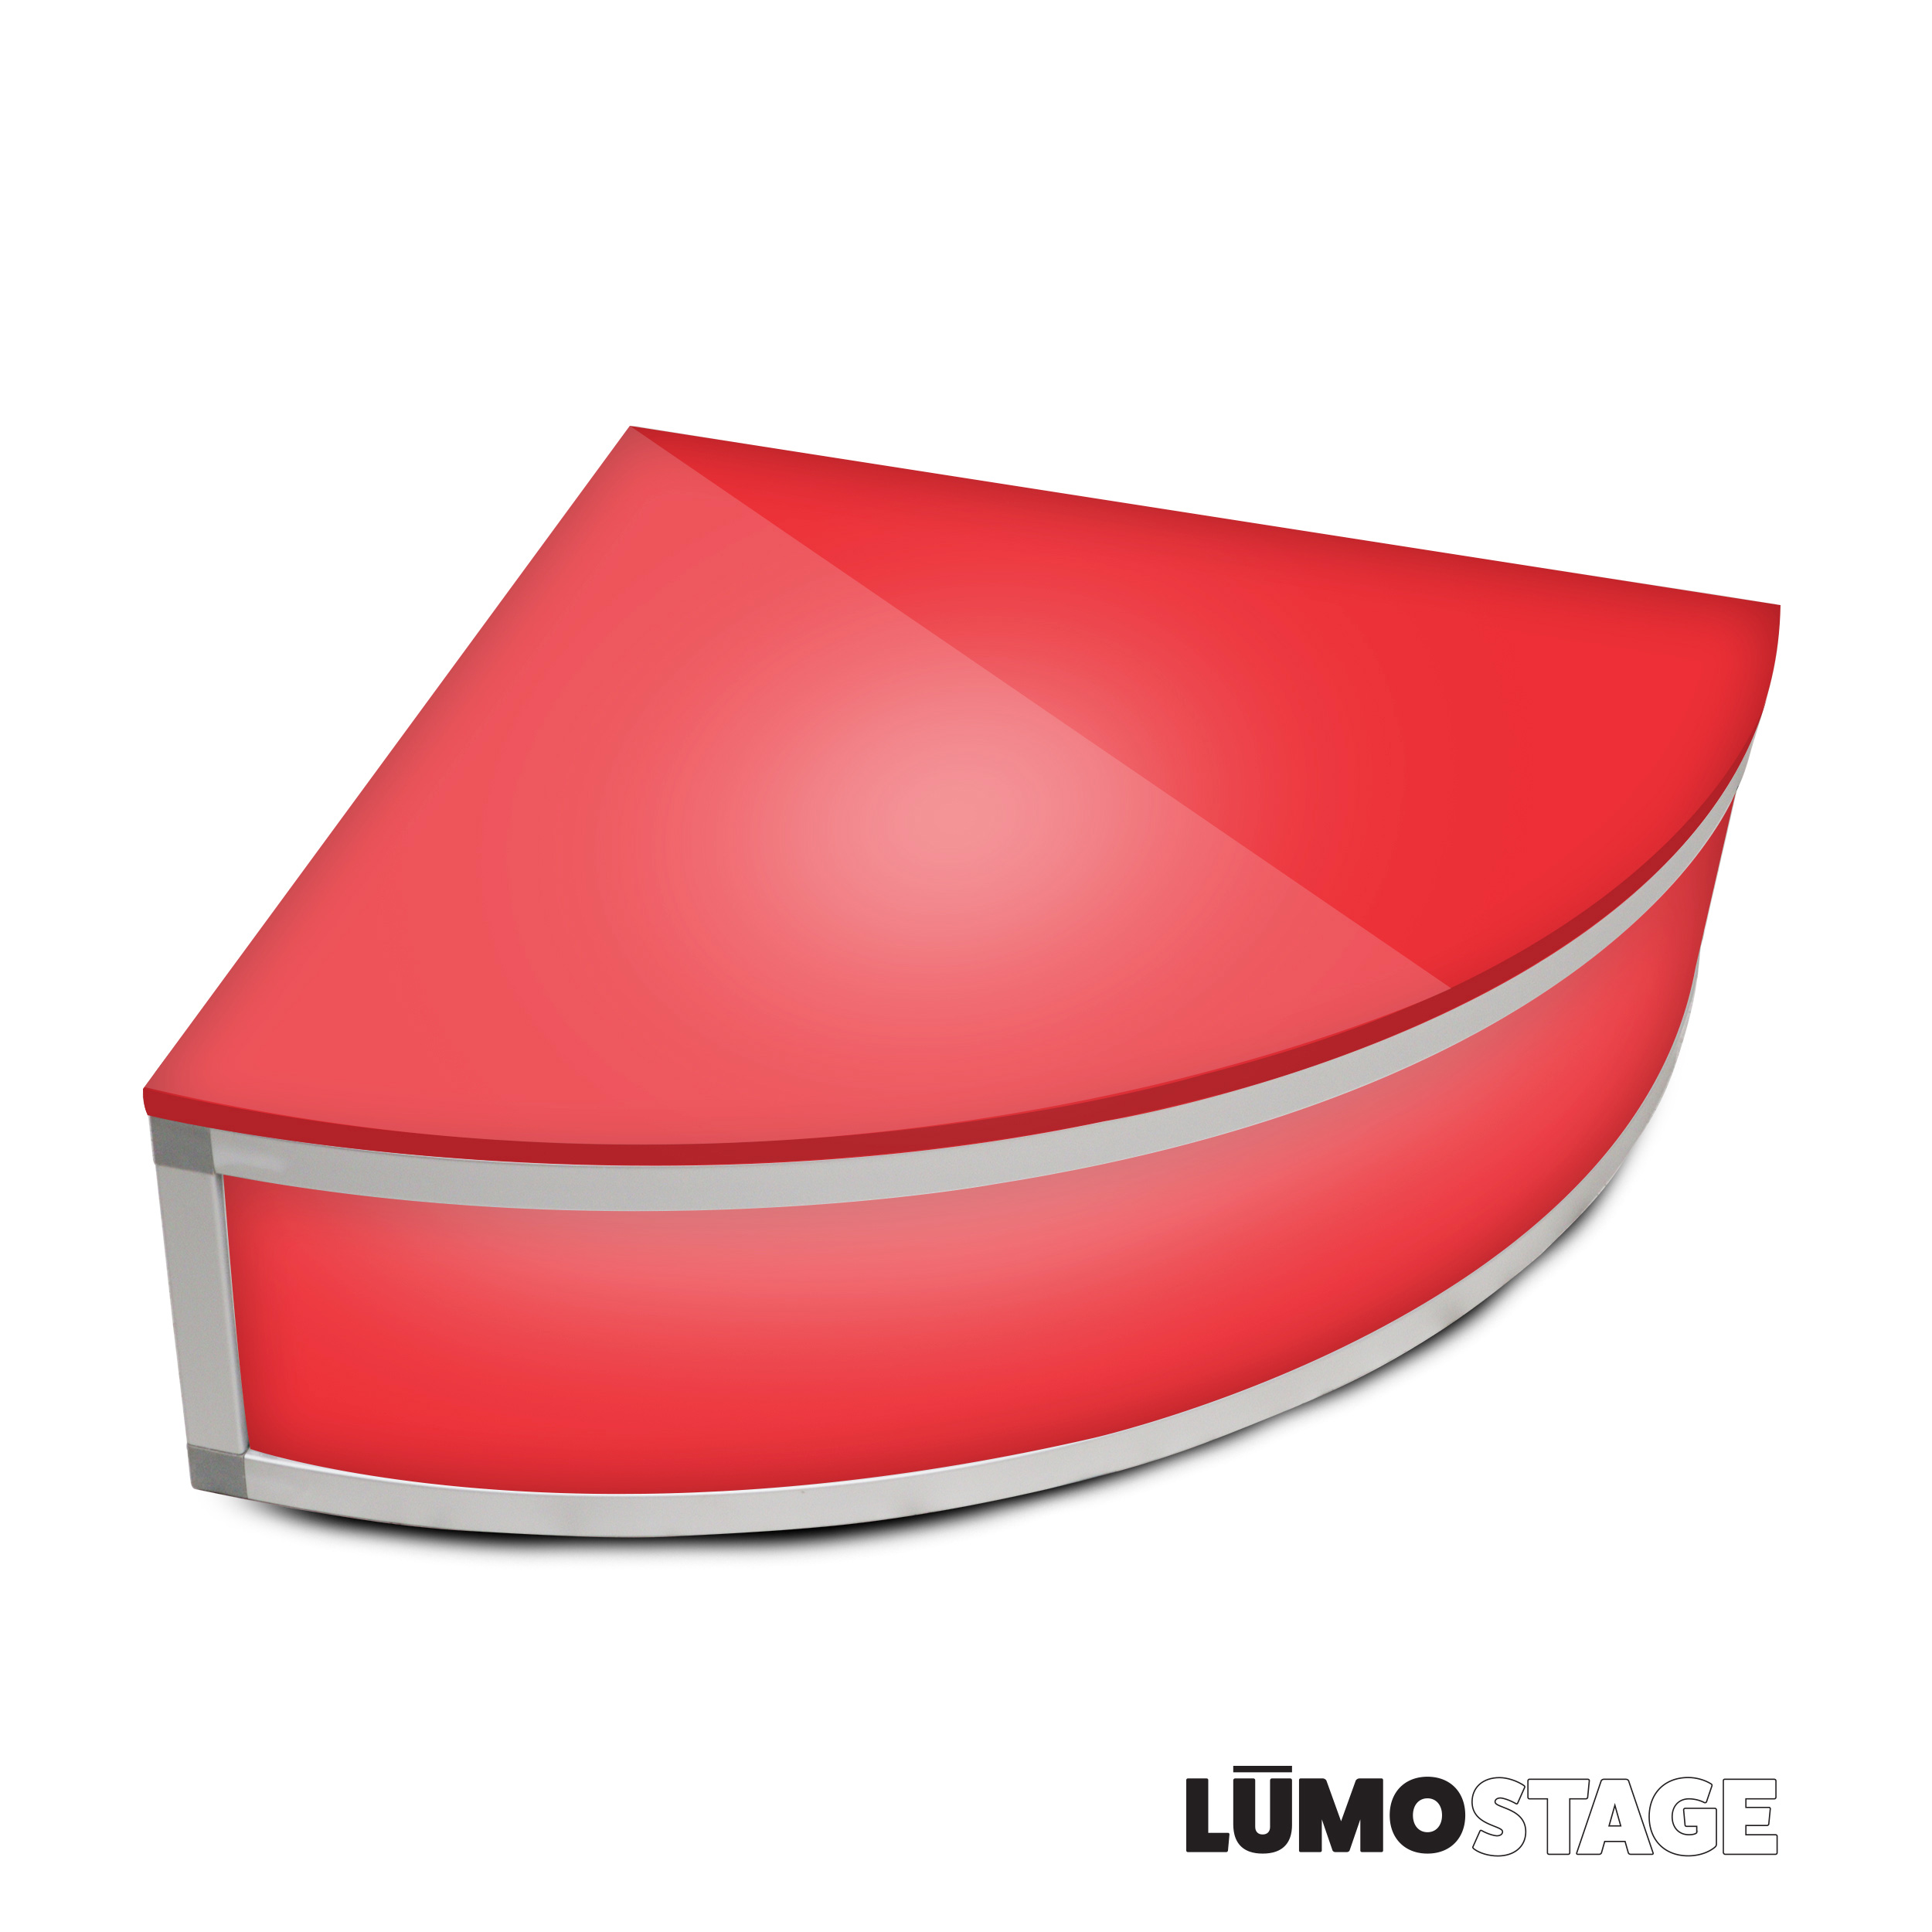 ProX XSA-2X2-8QR | Lumo Stage Acrylic Platform 2'x'2x8" Rounded Cube Section